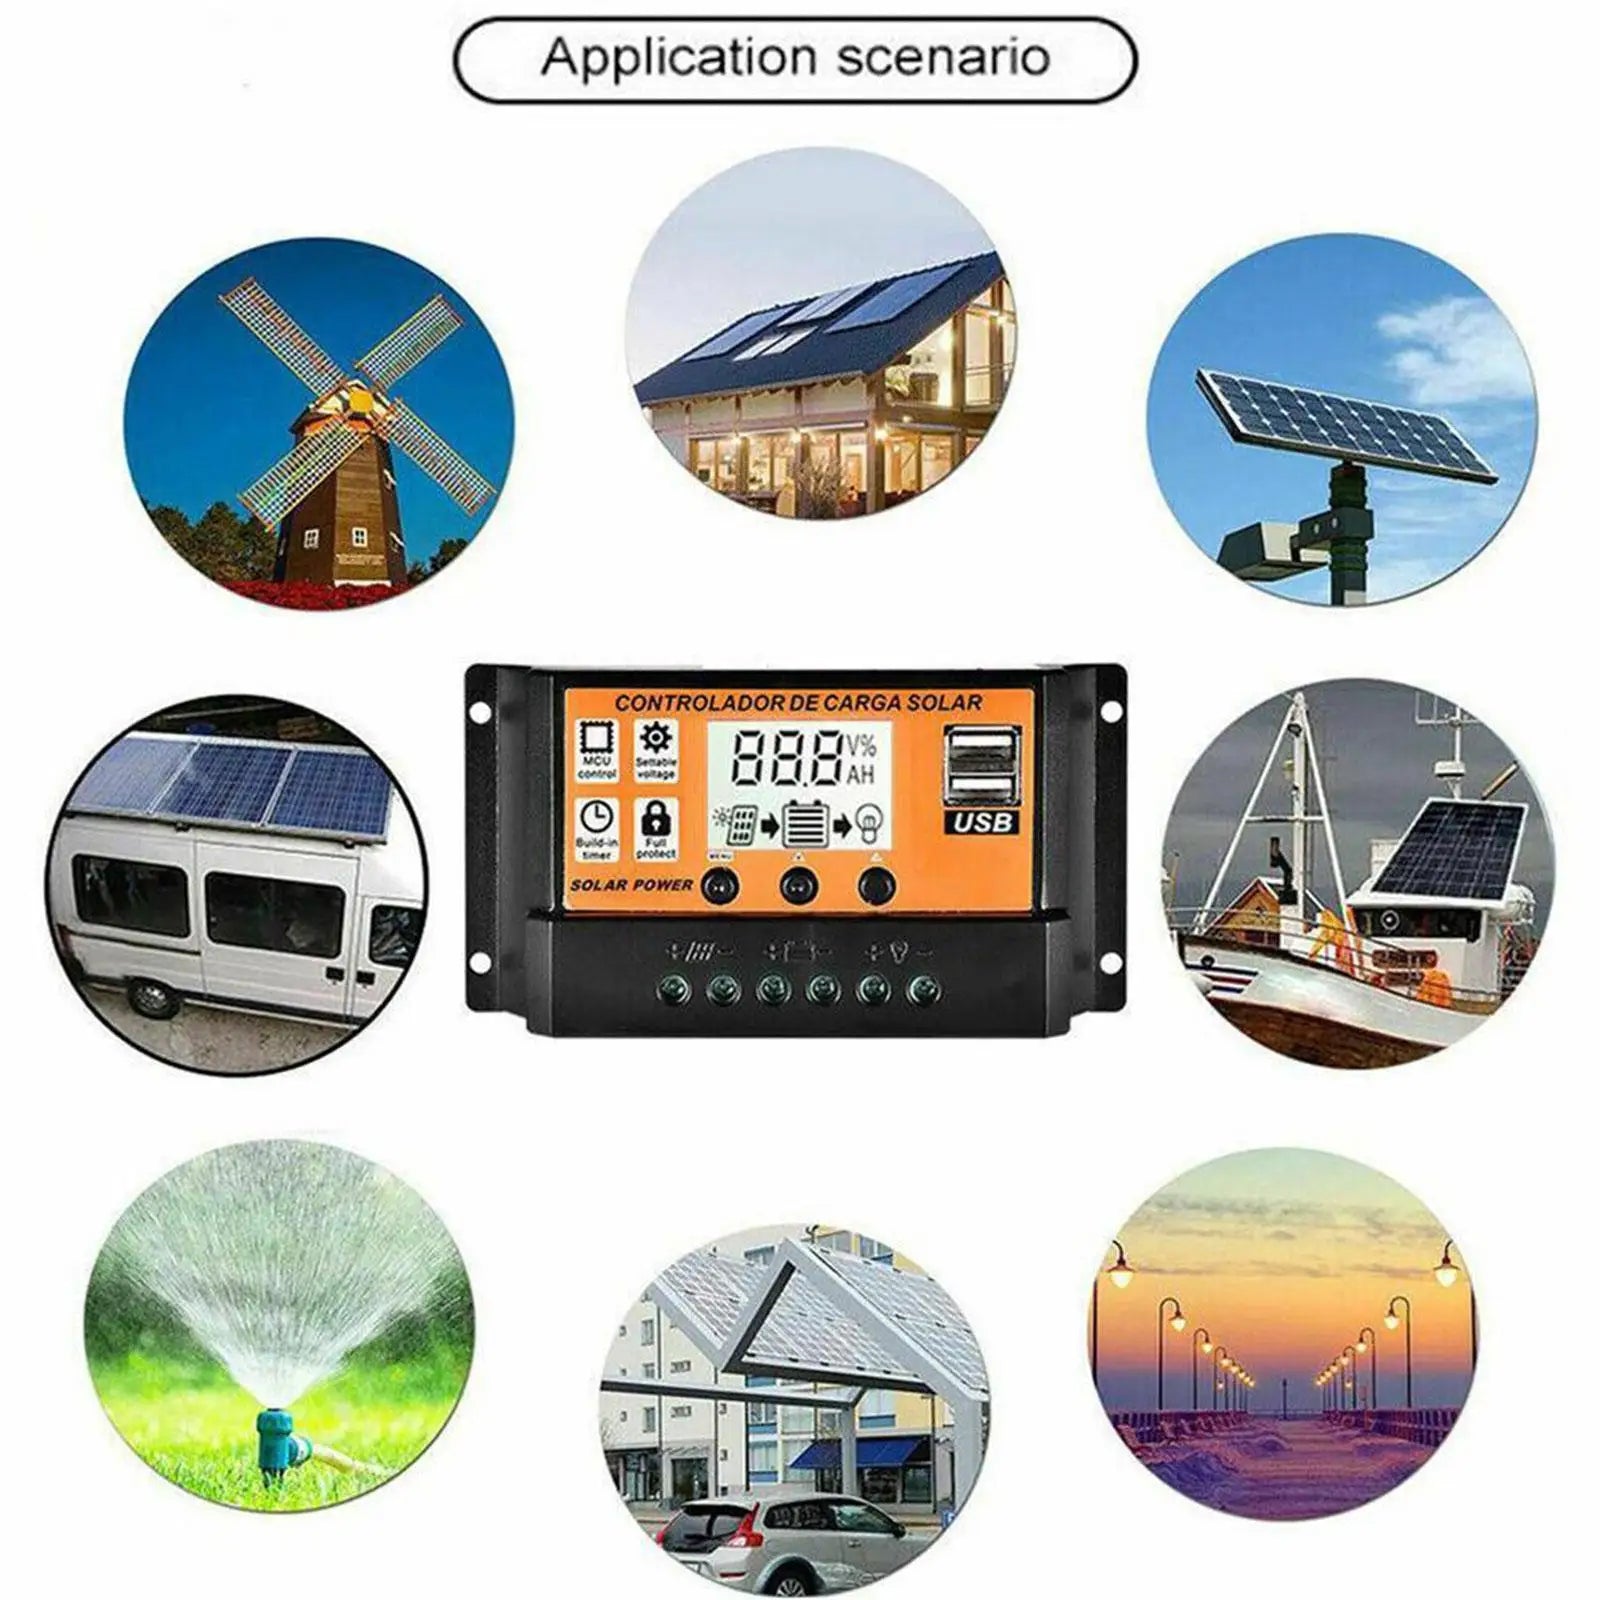 MPPT Solar Charge Controller, Automated solar charger for batteries with auto-tracking and MPPT tech, perfect for off-grid systems.